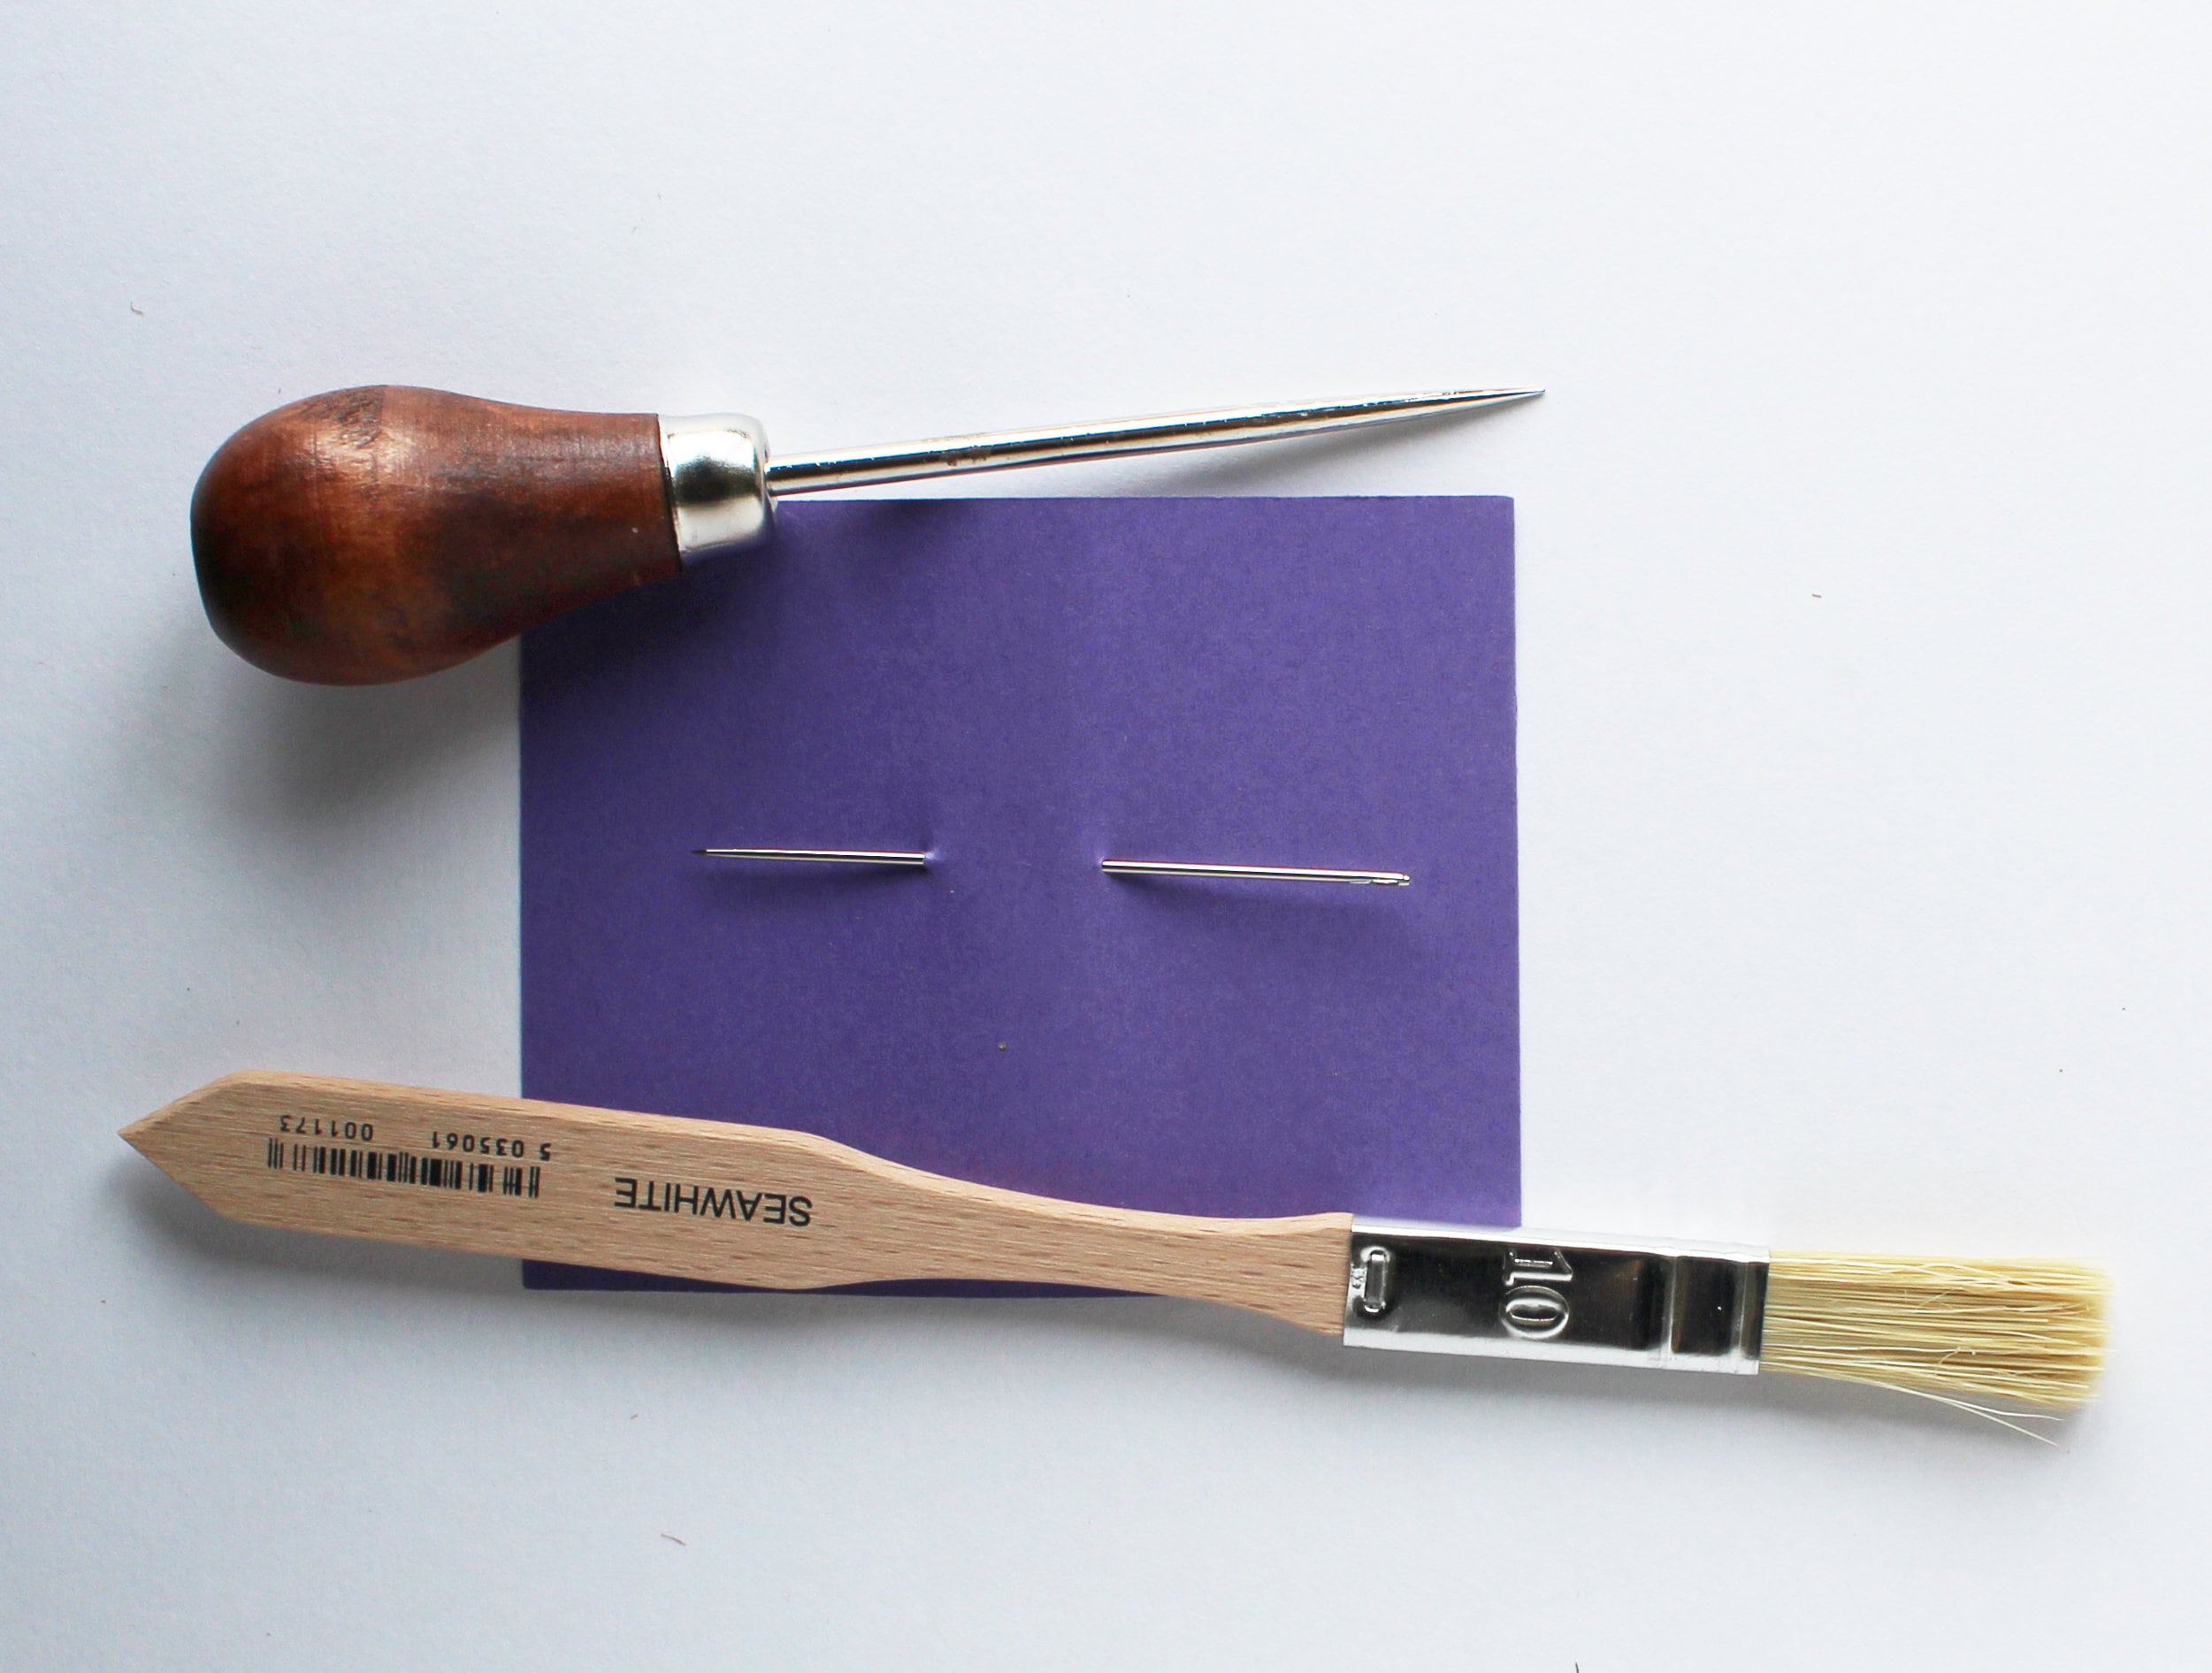 Book Binding Kit. Make Your Own Handbound, Hardcover Journal With Coptic  Binding. Book Binding Materials and Tools. 